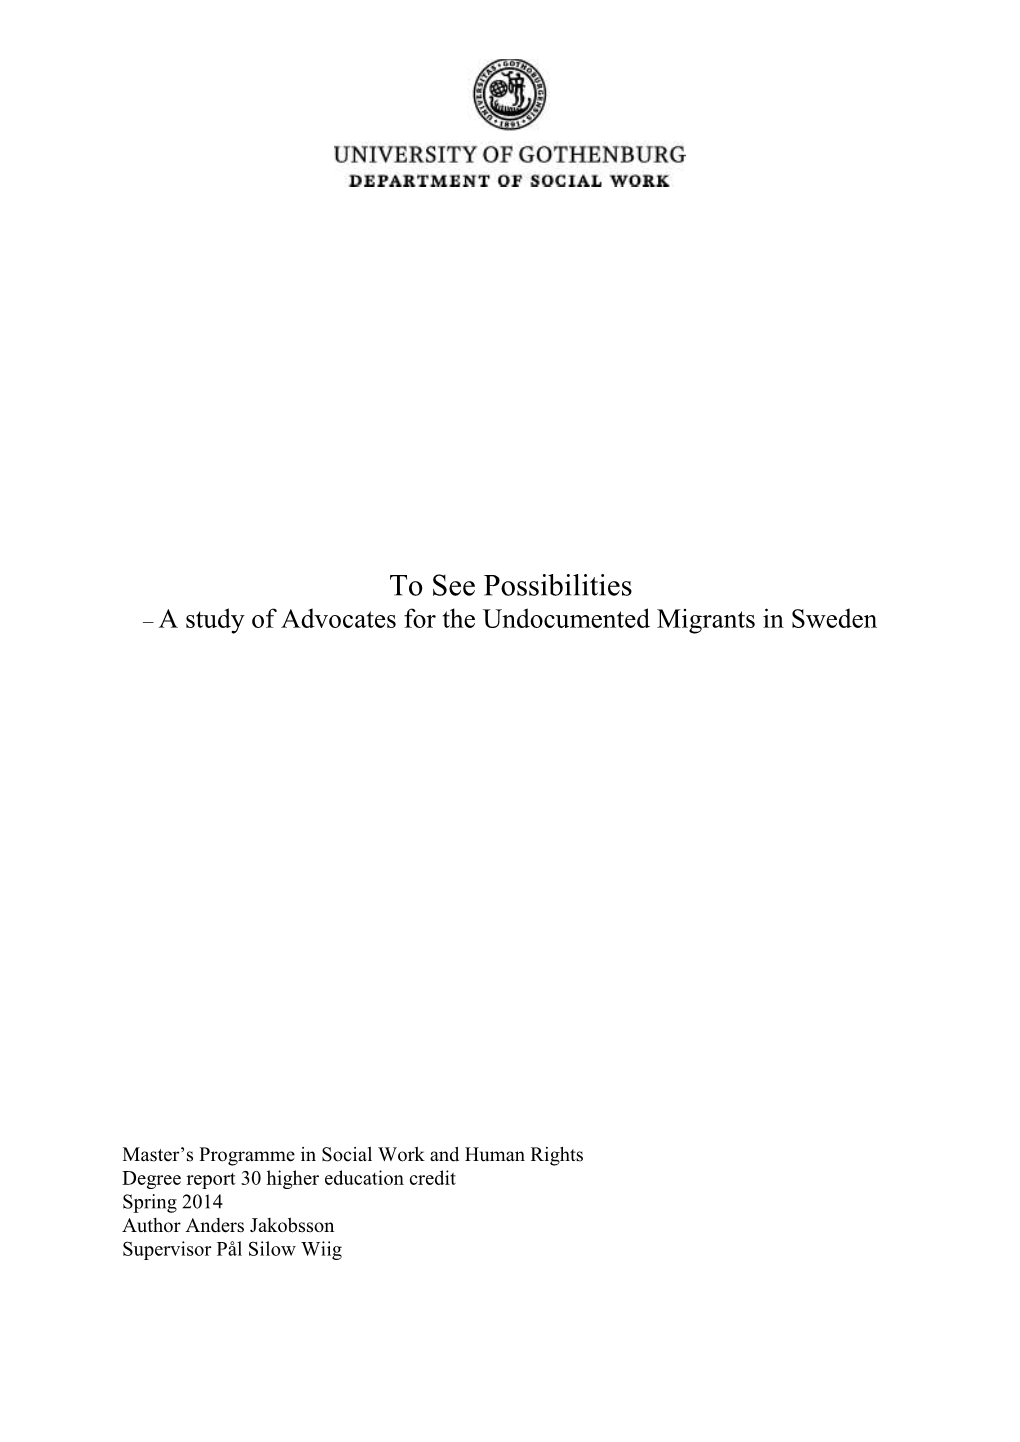 To See Possibilities – a Study of Advocates for the Undocumented Migrants in Sweden